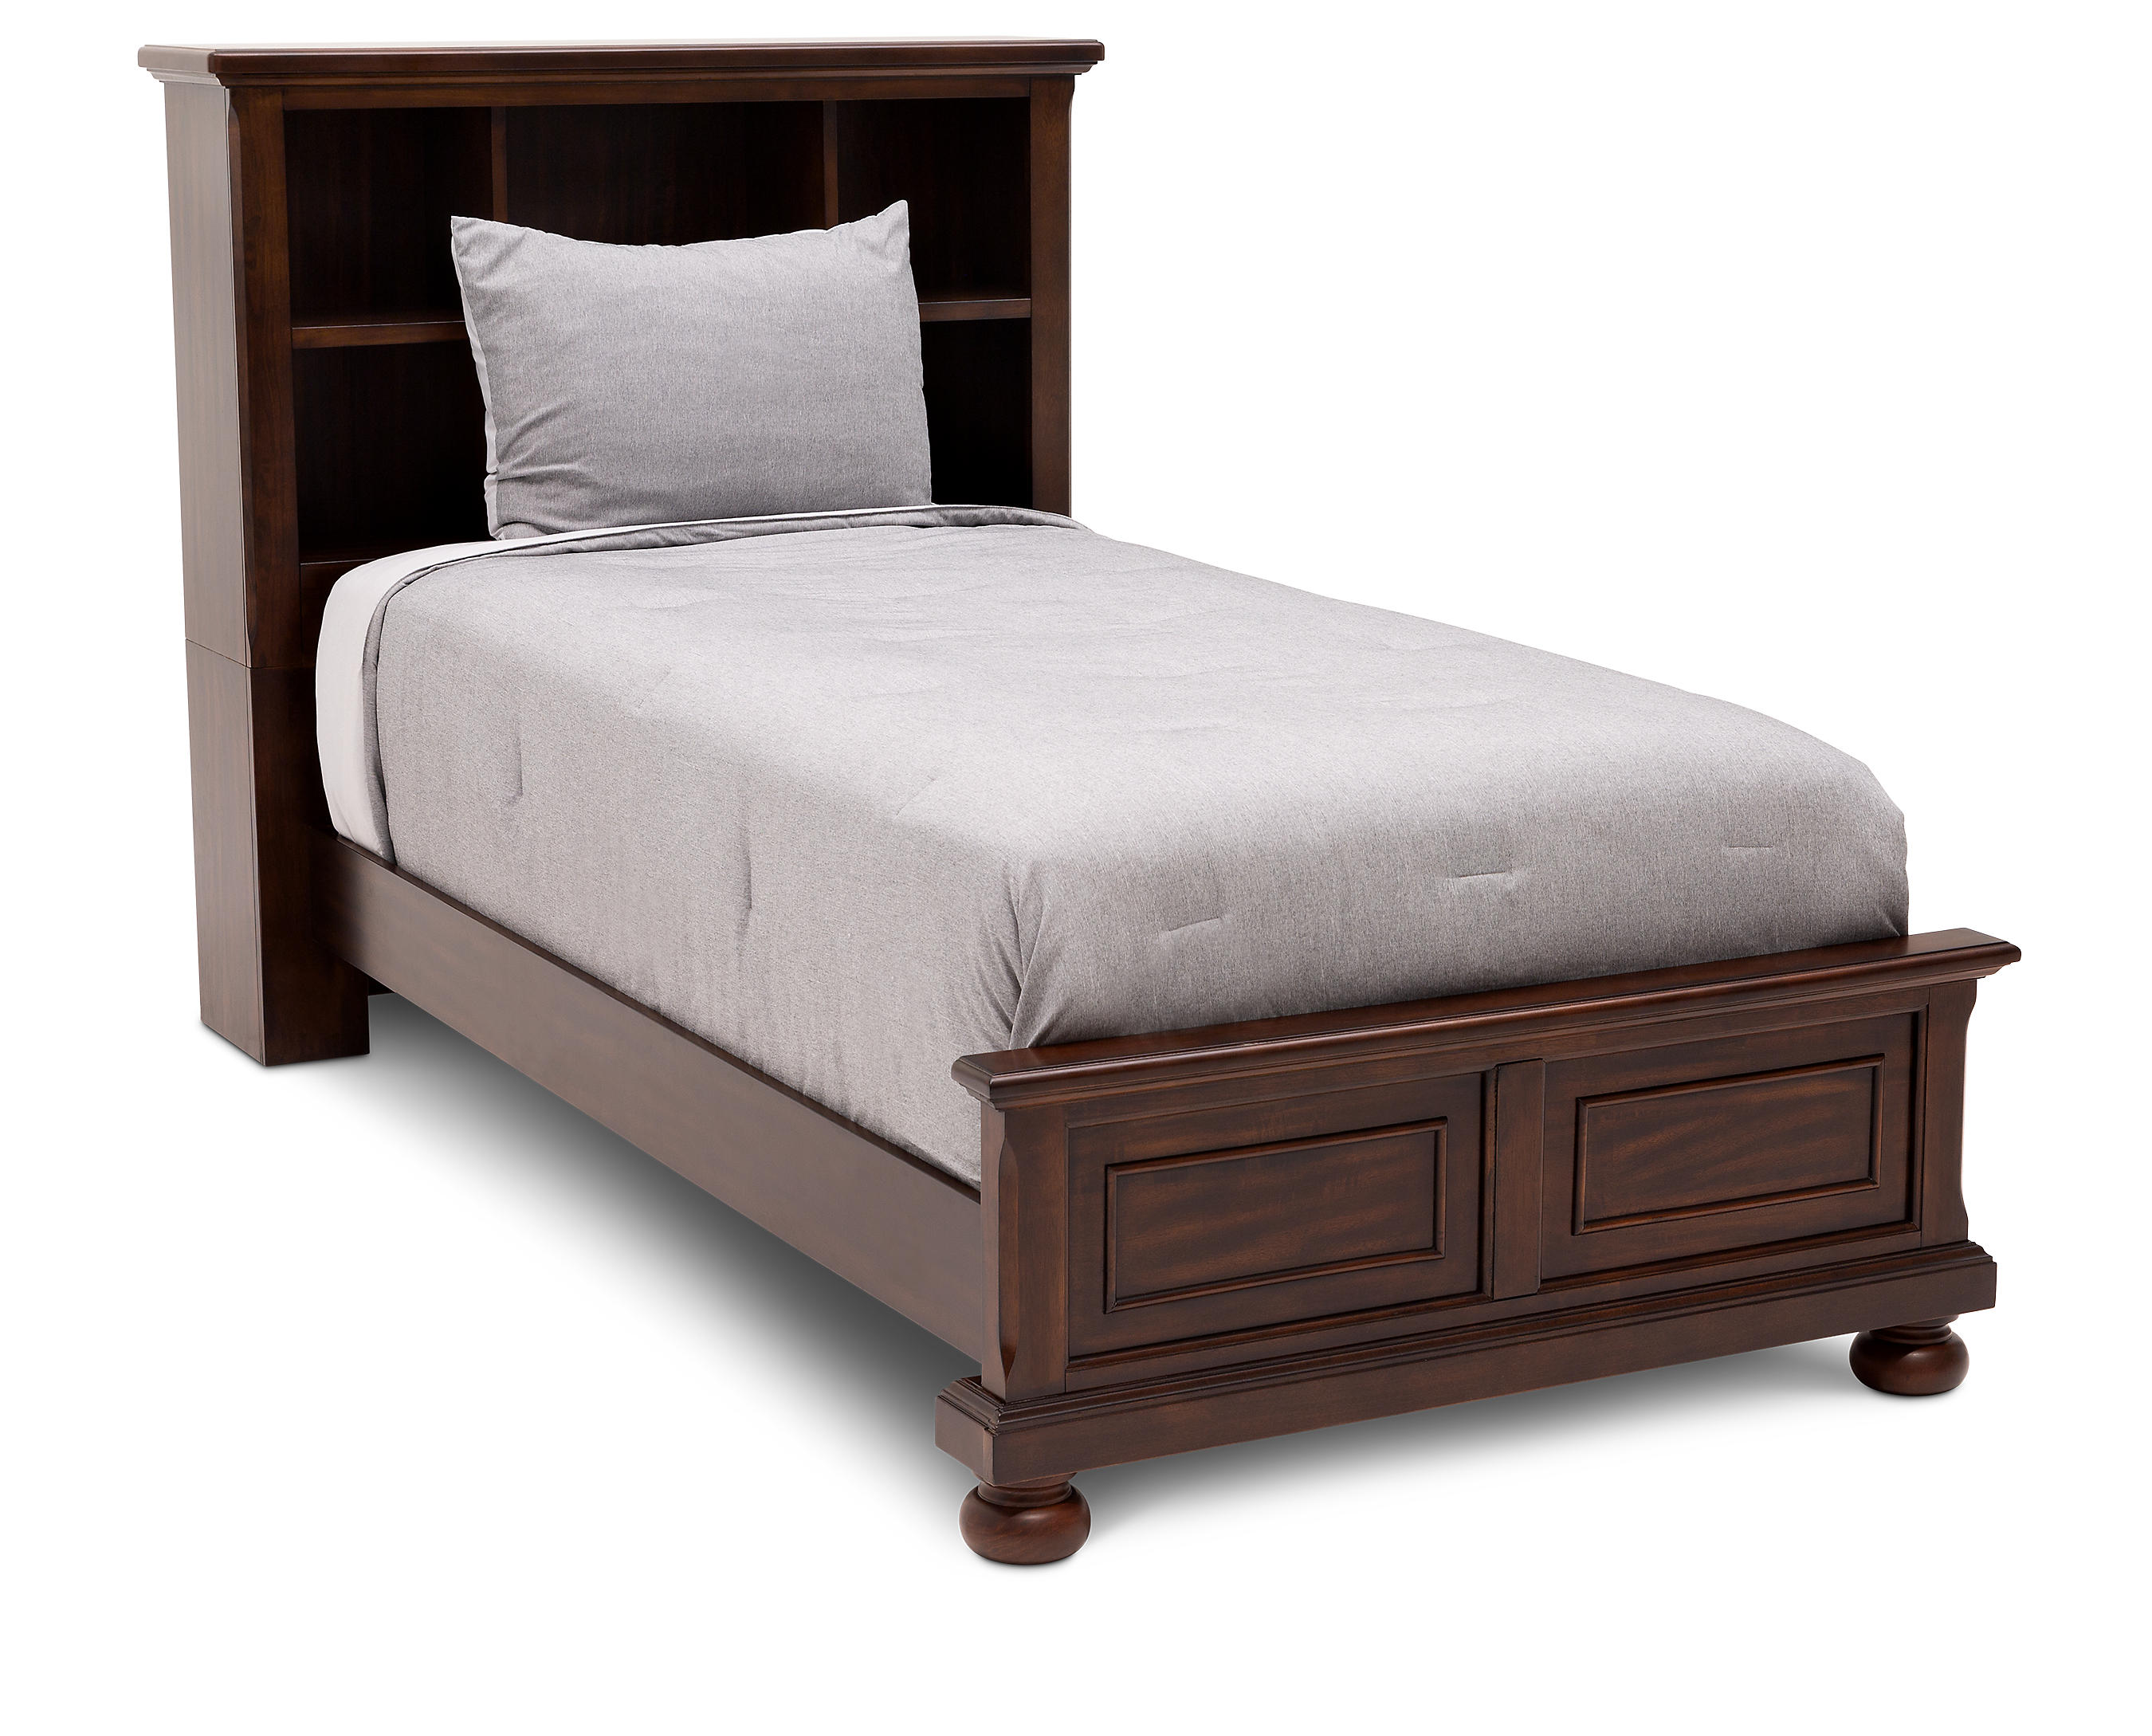 Voyages Bookcase Bed Furniture Row, Value City Bookcase Bed